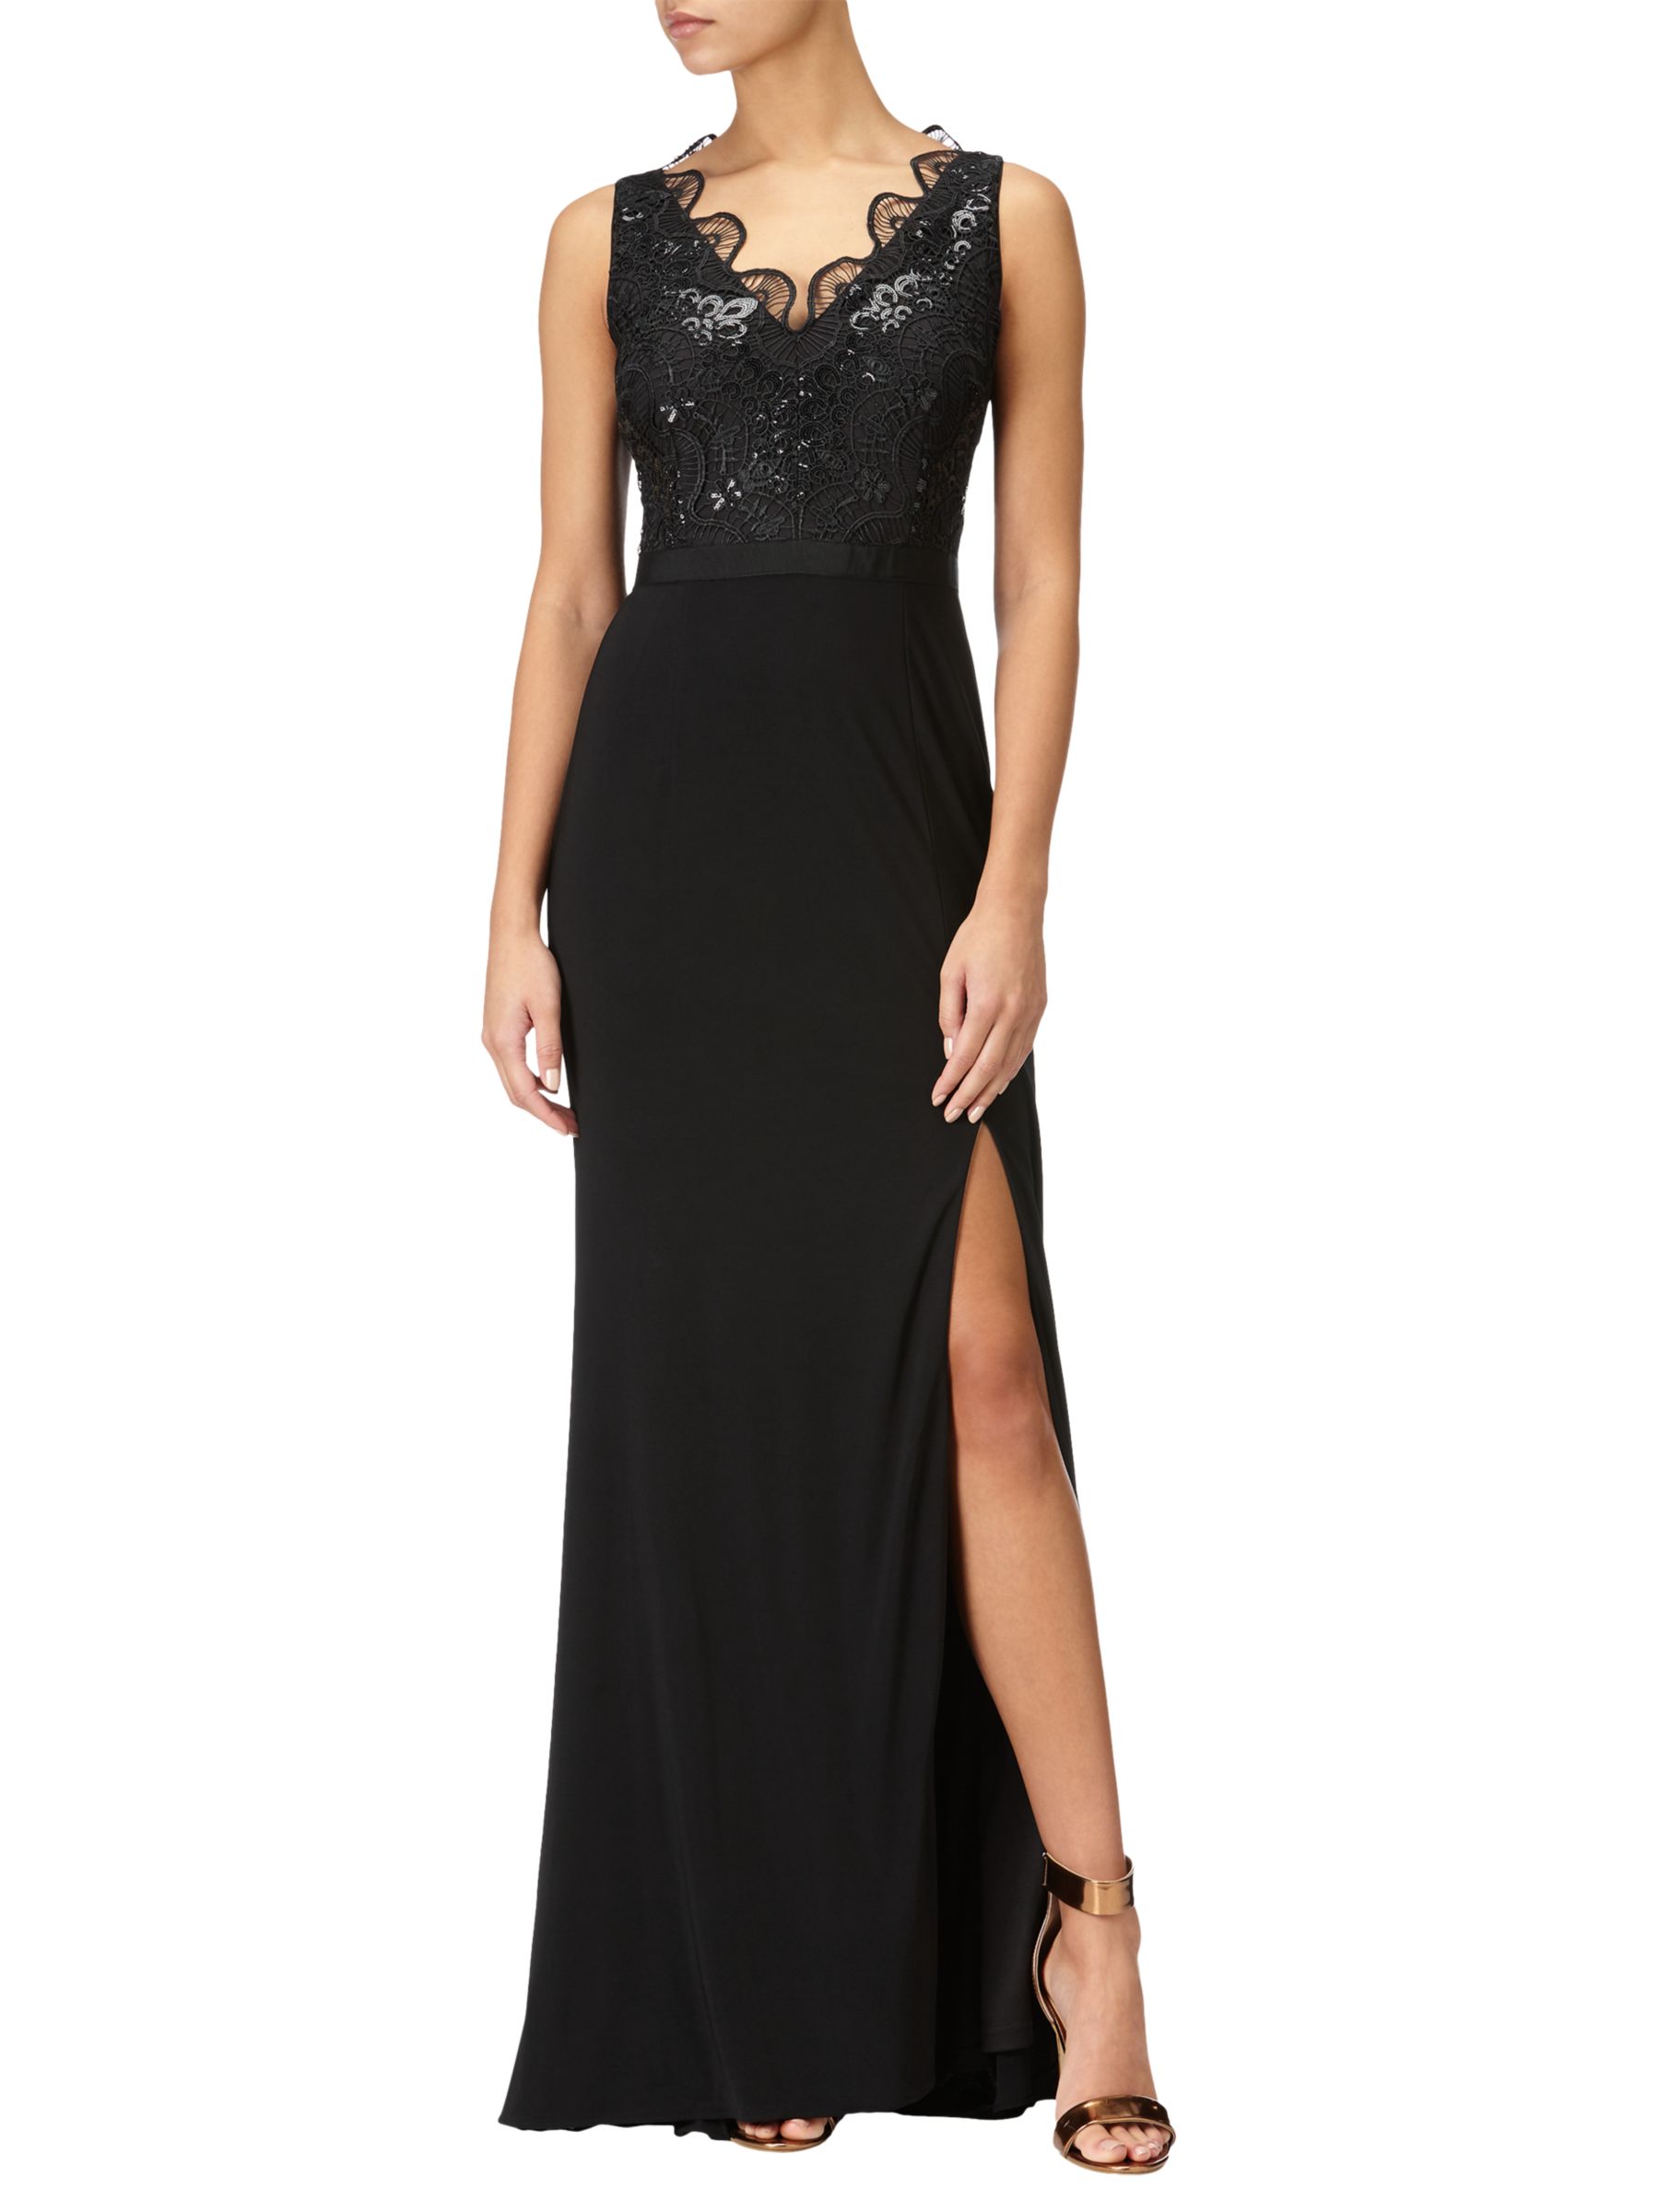 Adrianna Papell Lace Full Length Dress, Black at John Lewis & Partners